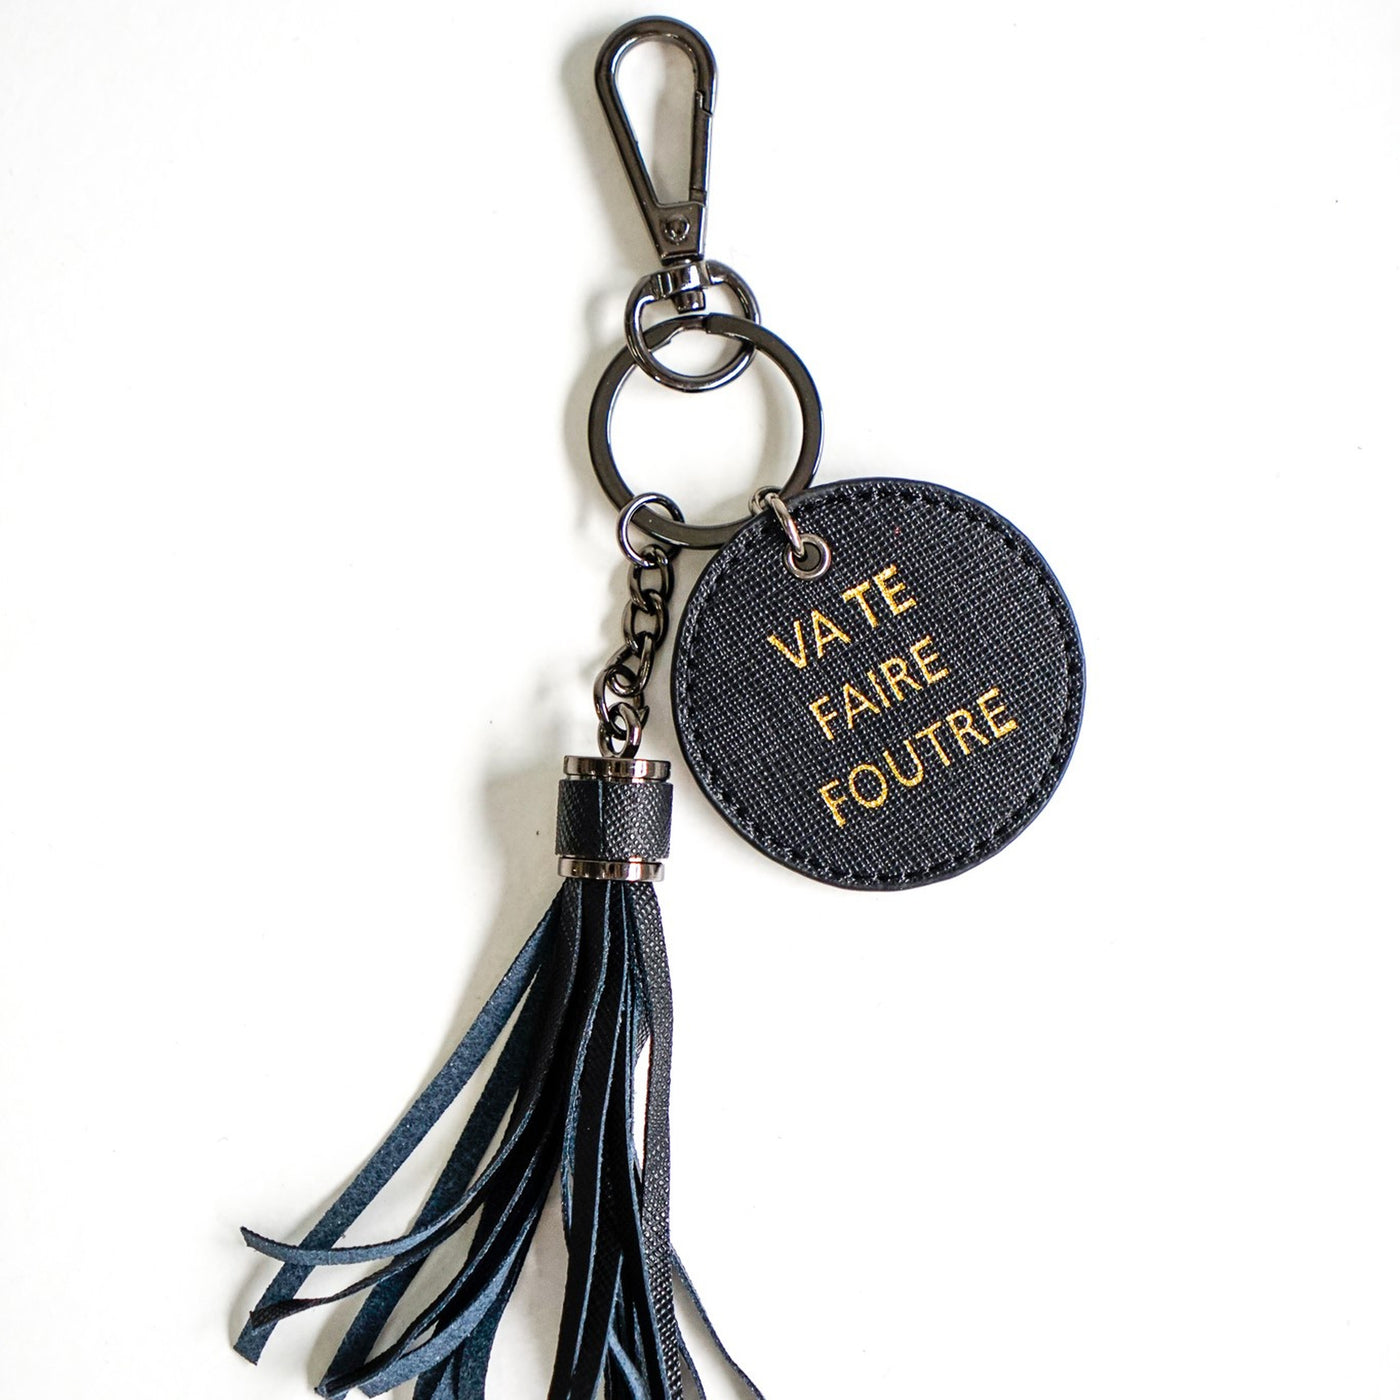 Go F yourself Black keyring - Branche Store